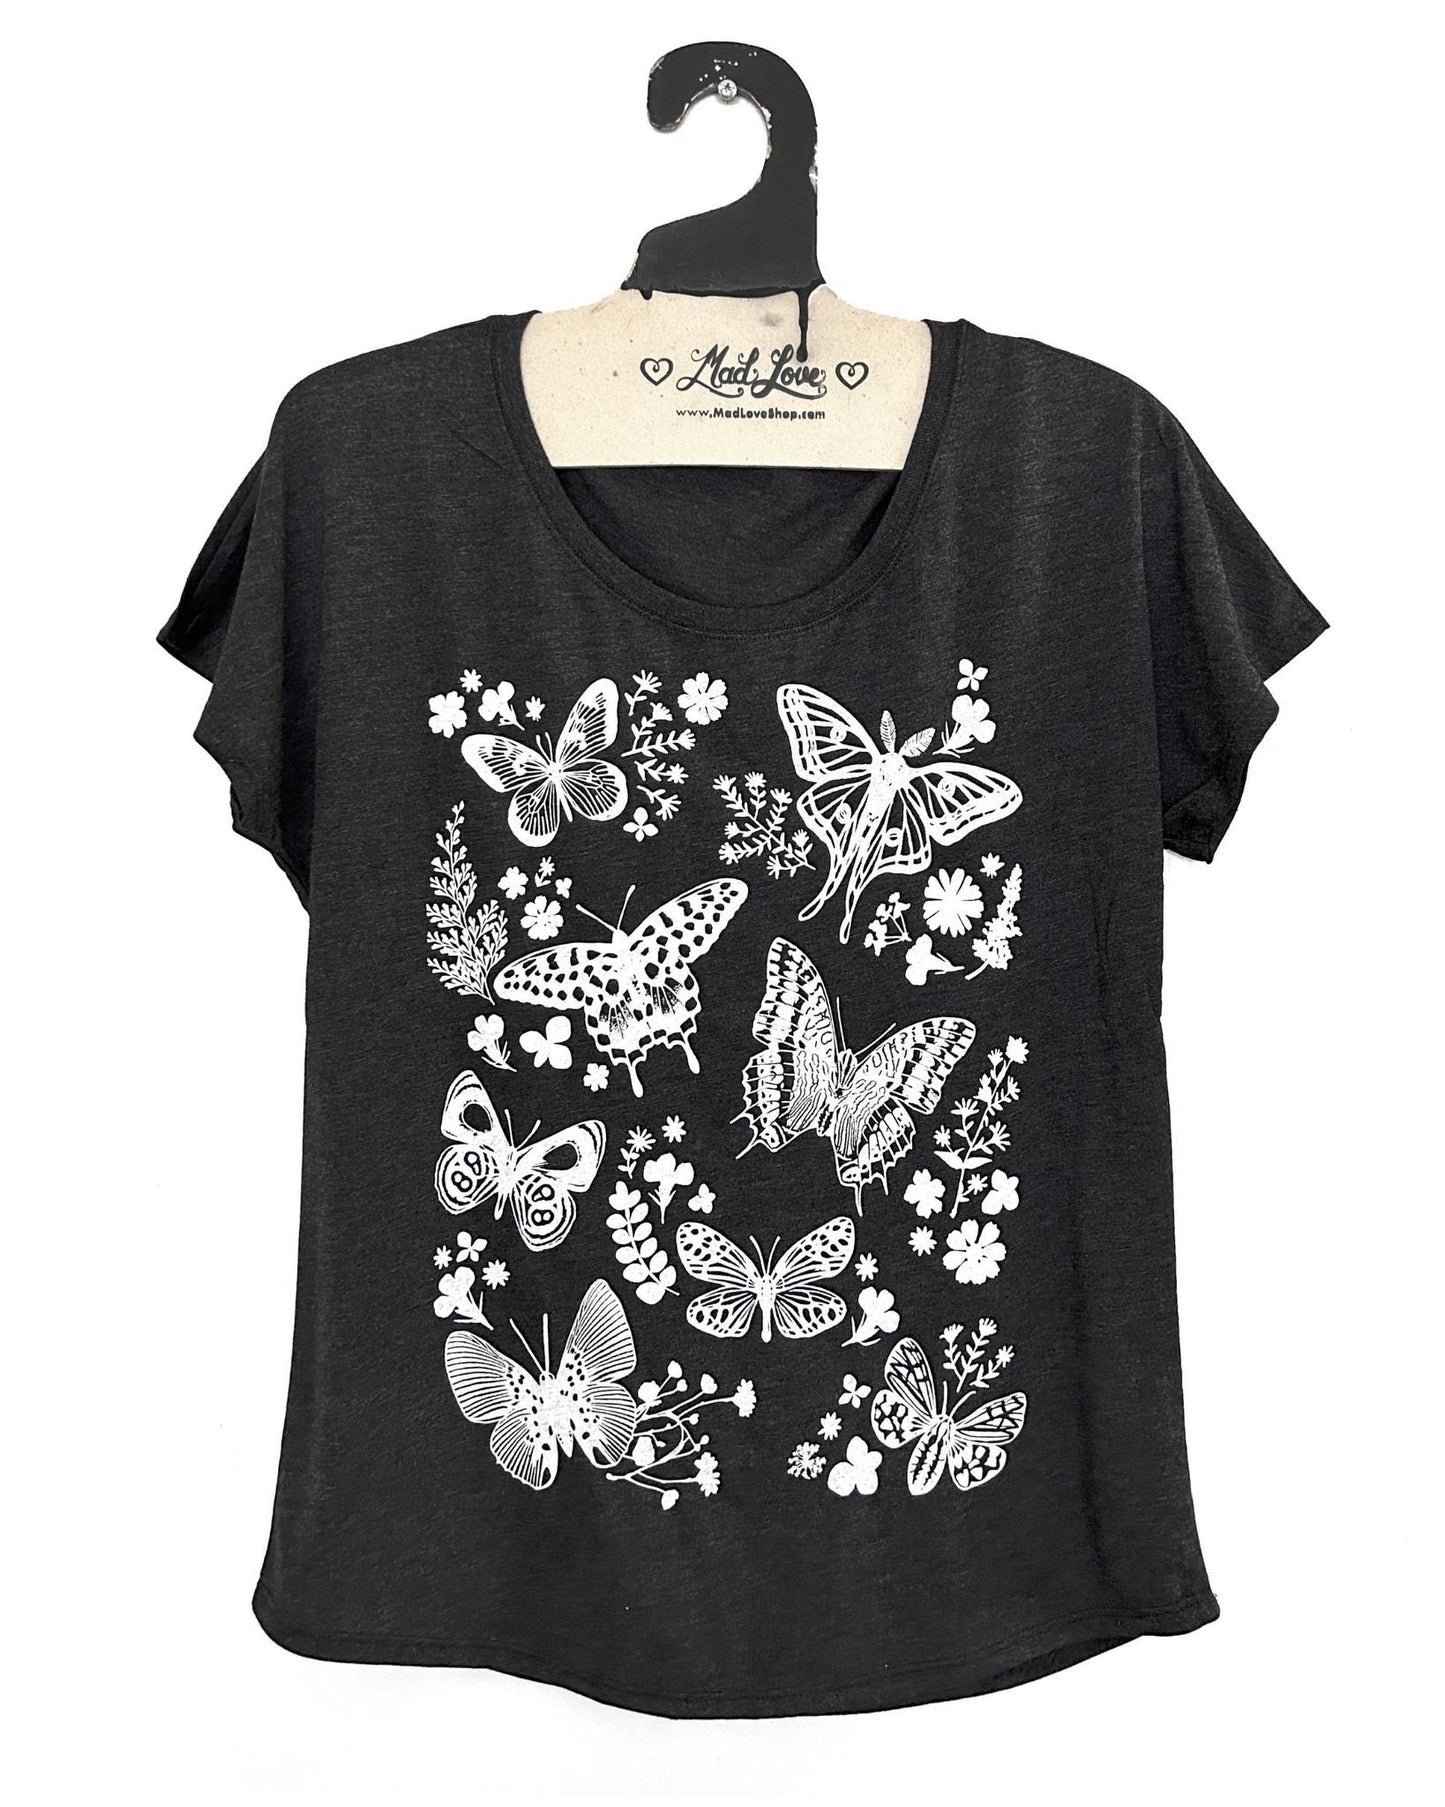 Mad Love Black Dolman Top with Moths & Butterflies - size Small